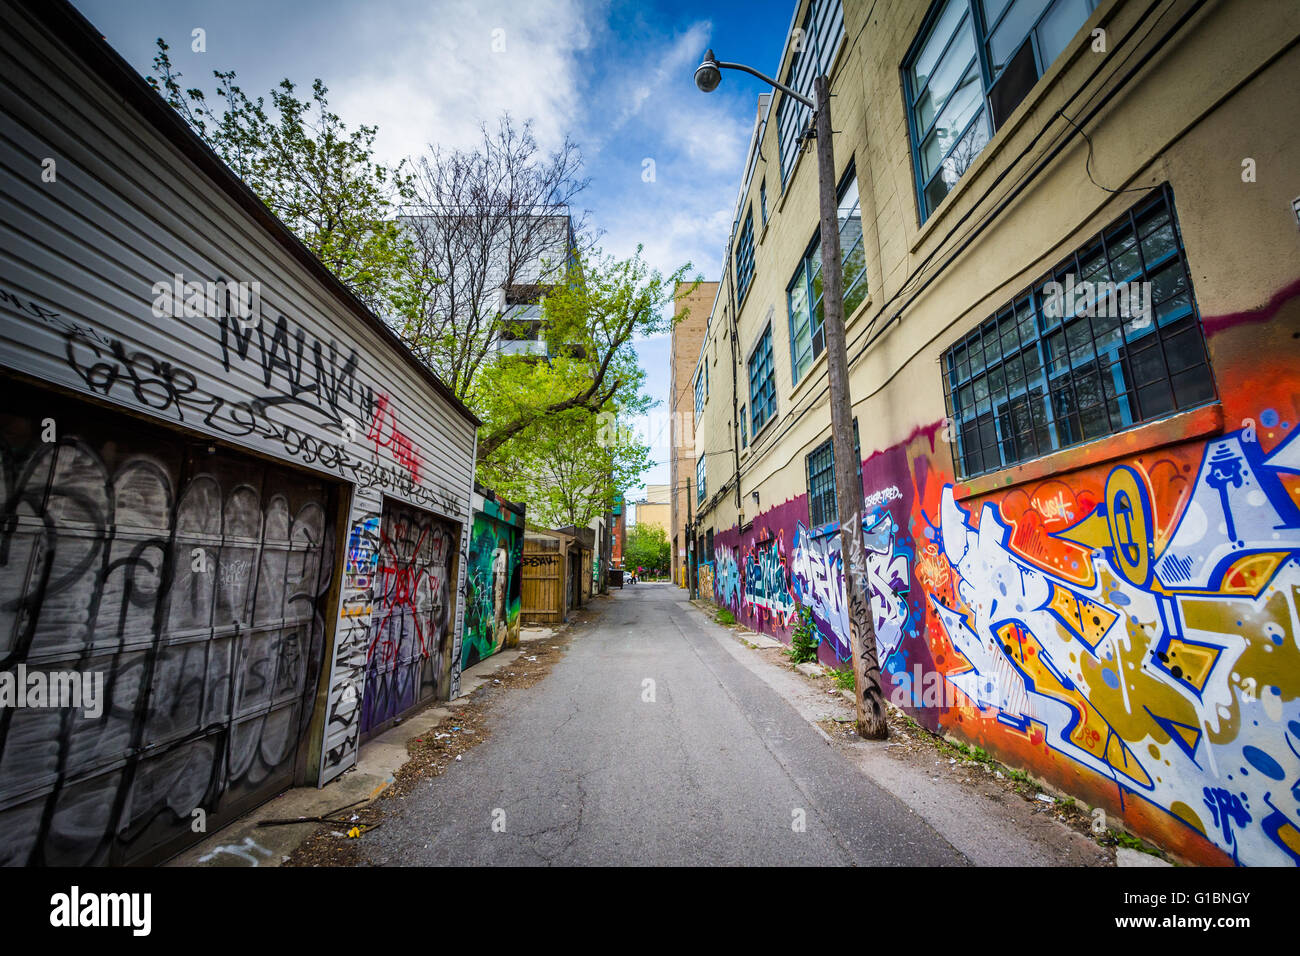 Graffiti in an alley in the Fashion District, of Toronto, Ontario. Stock Photo